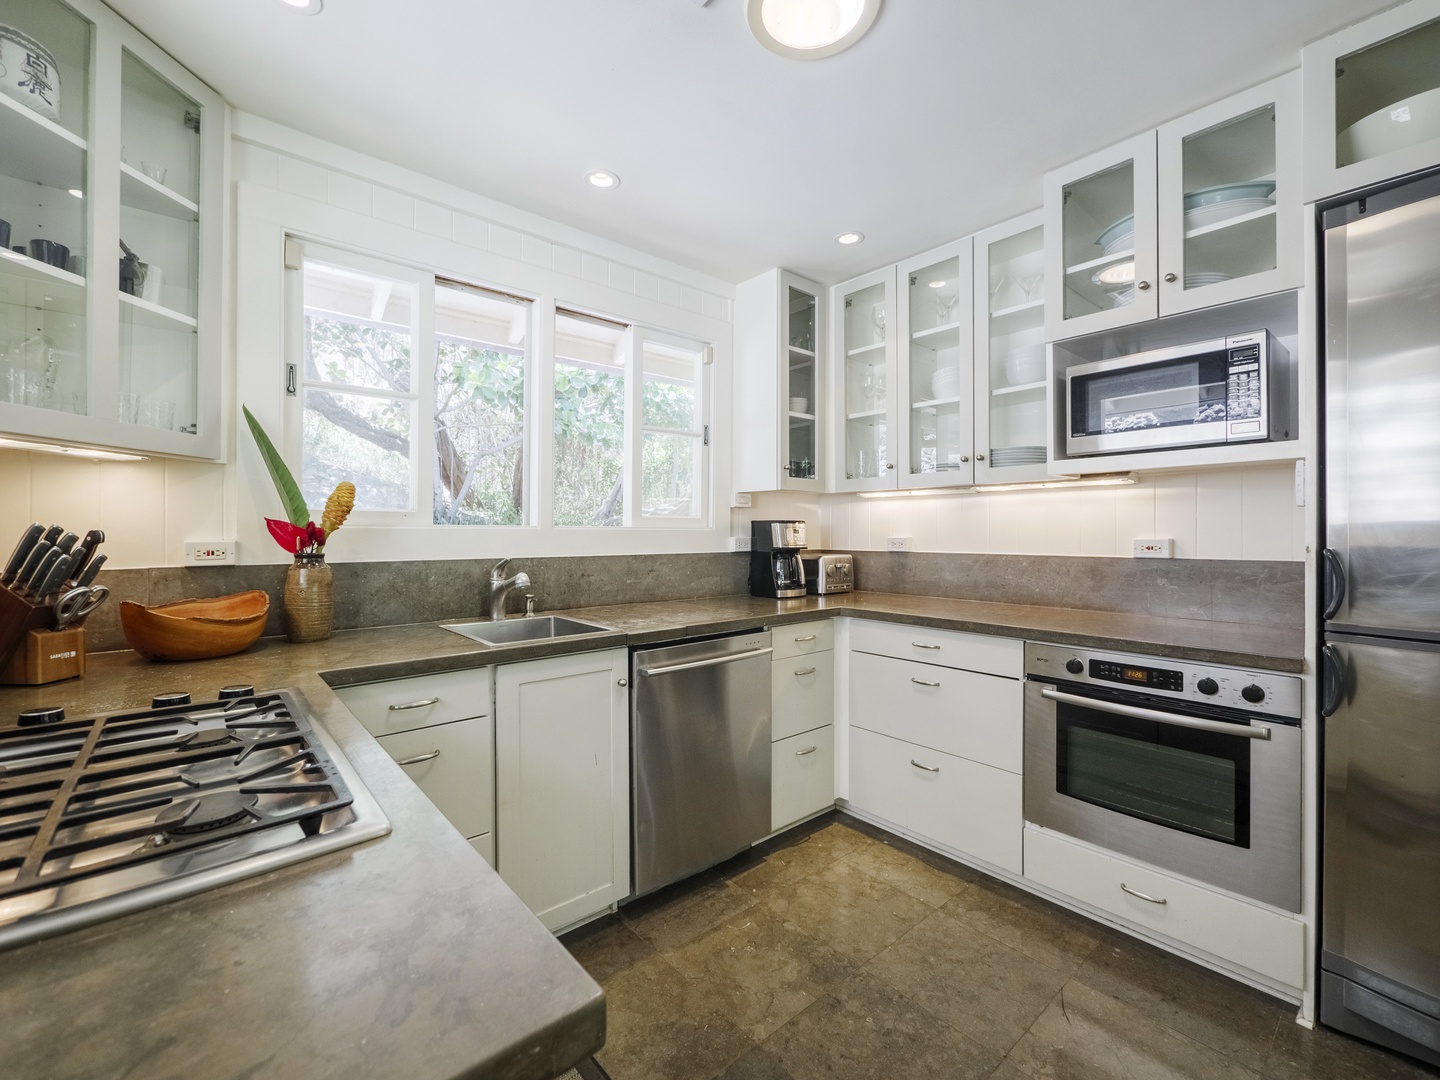 Honolulu Vacation Rentals, Diamond Head Bali Retreat** - Create sumptuous meals in our gourmet kitchen, with slate countertops with gas stove and a complete set of kitchen appliances.